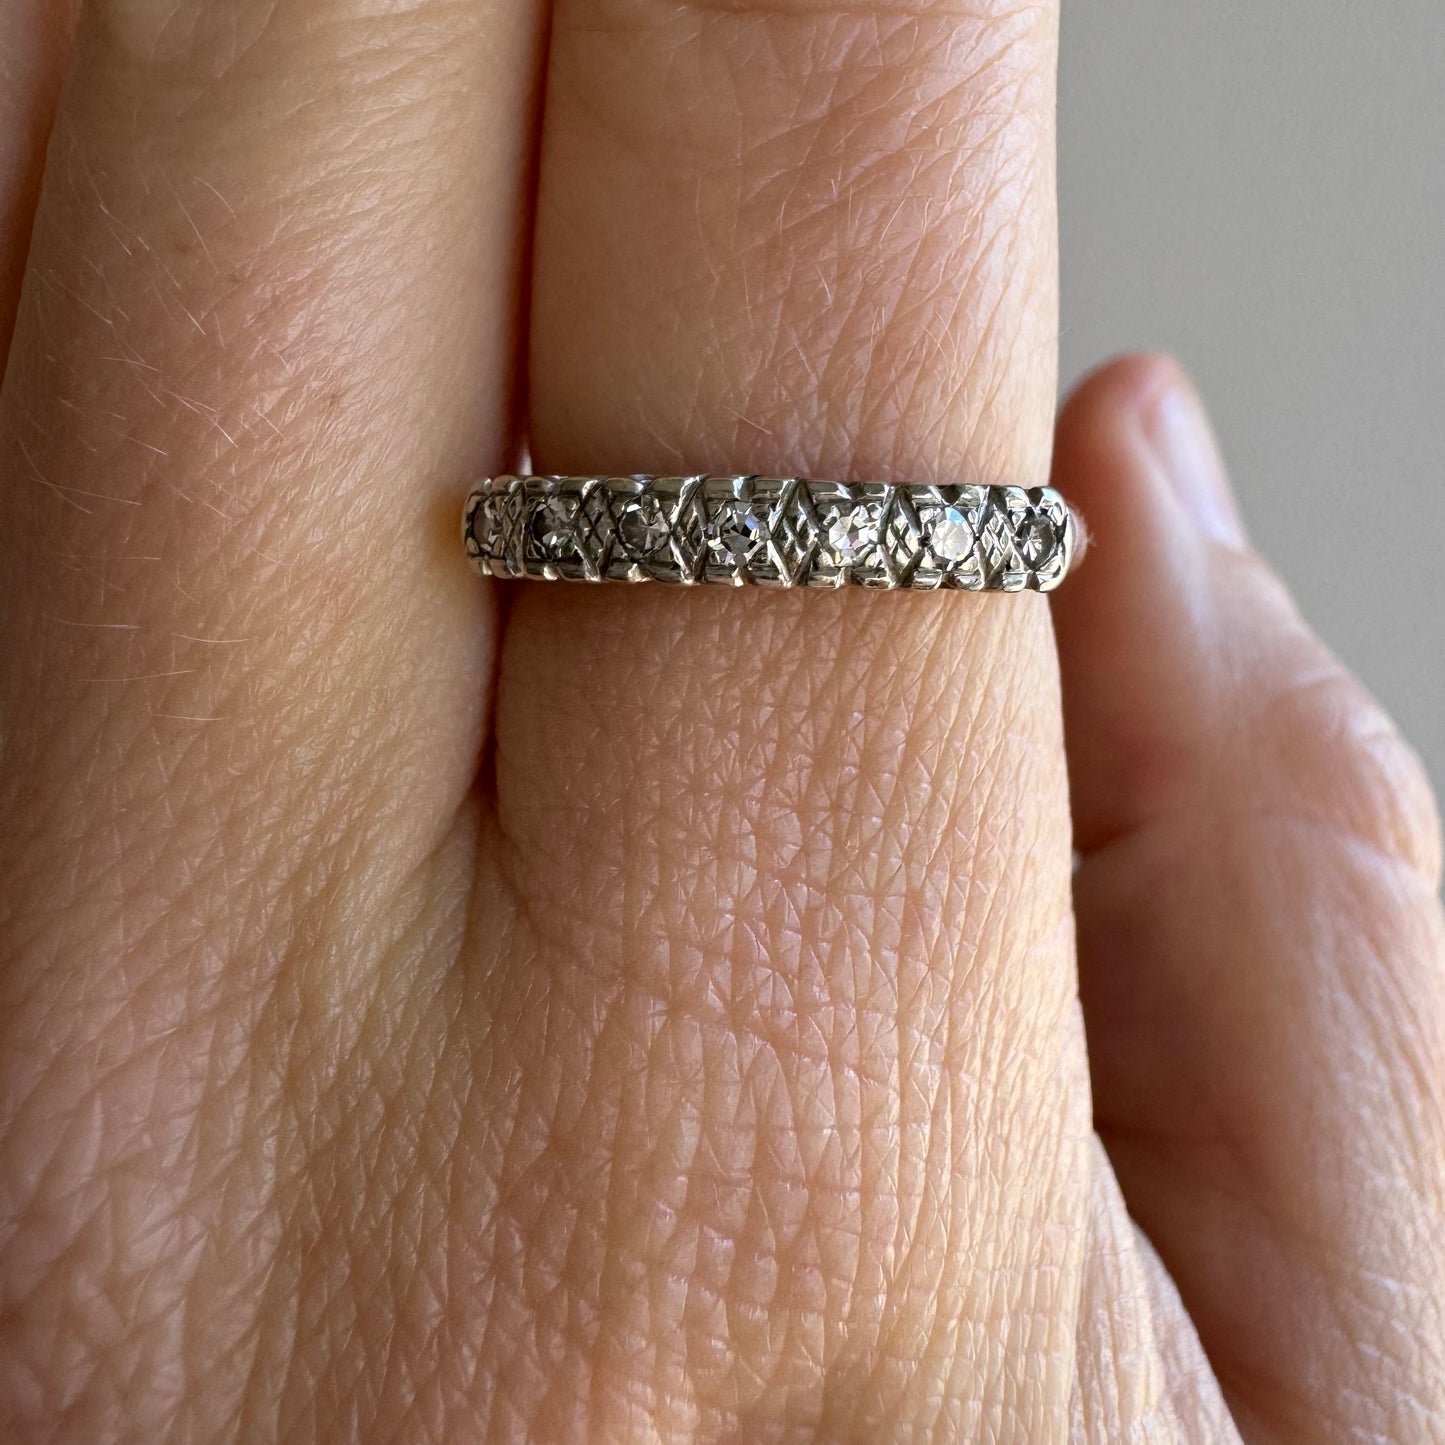 V I N T A G E // mid century hugs and kisses / 14k yellow and white gold seven stone diamond ring / size 6.75